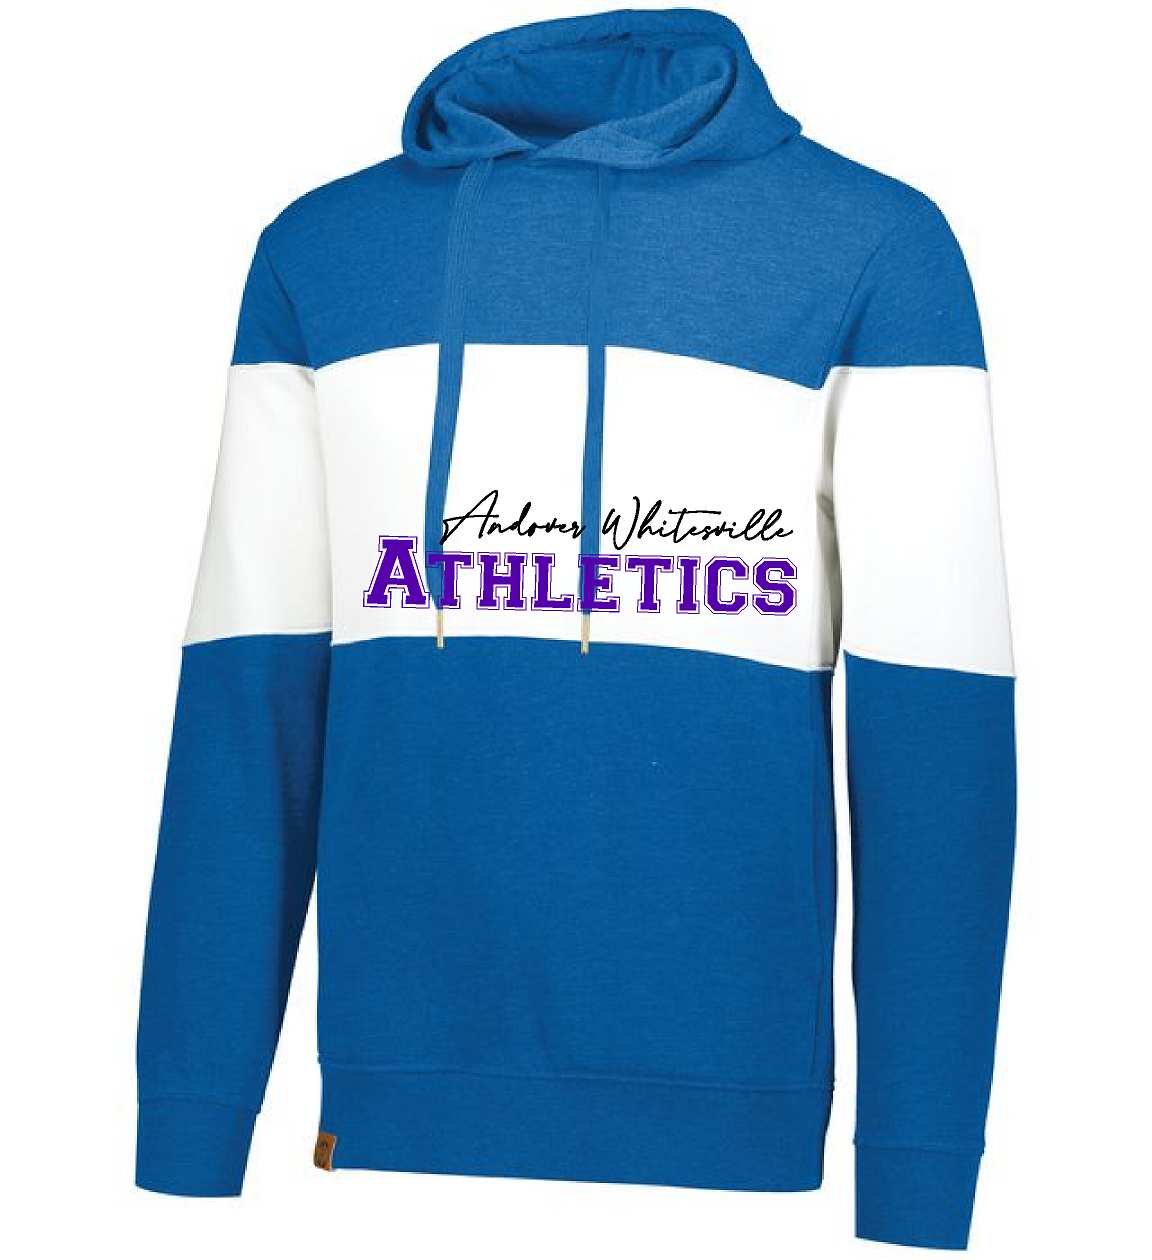 Andover-Whitesville Athletics Holloway Ivy League Hoodie 229563